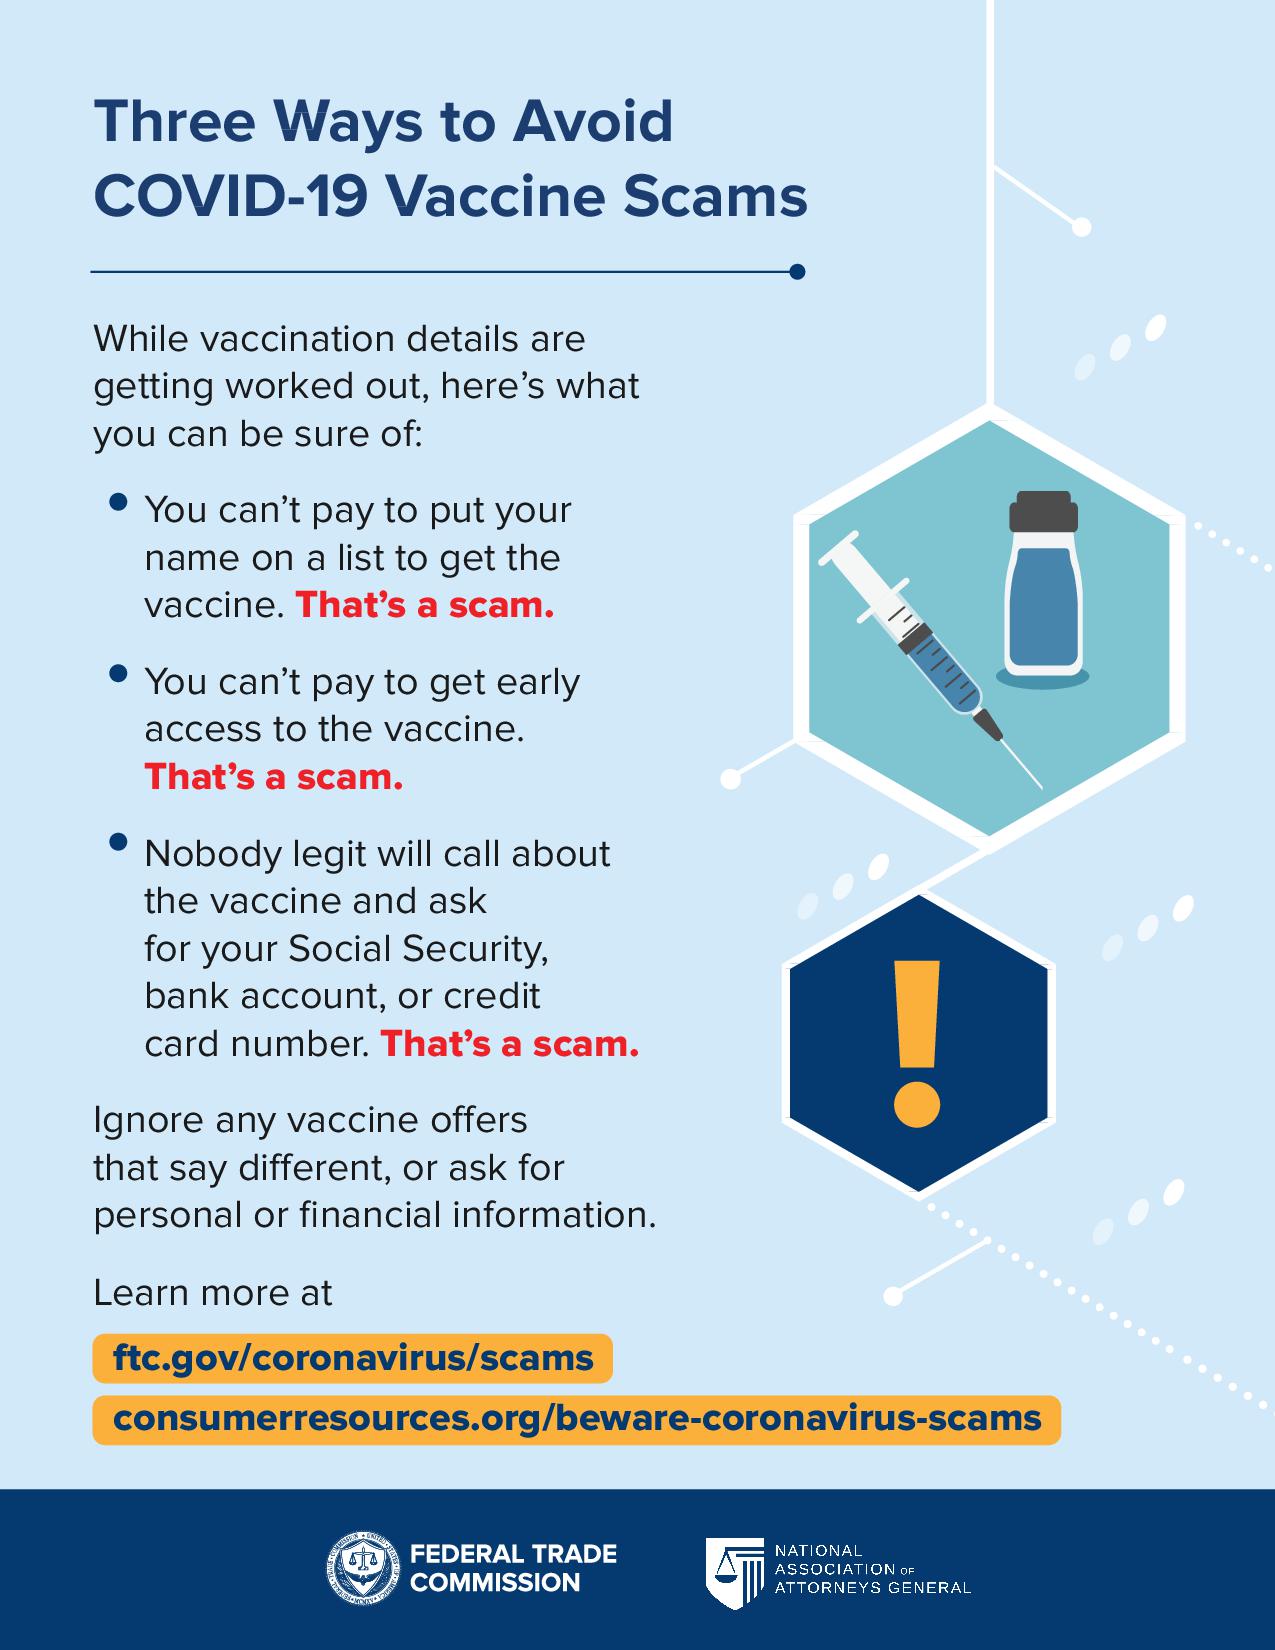 C_Users_ReymannS_Desktop_20199_covid_vaccine_scams_infographic_8-5x11_v3